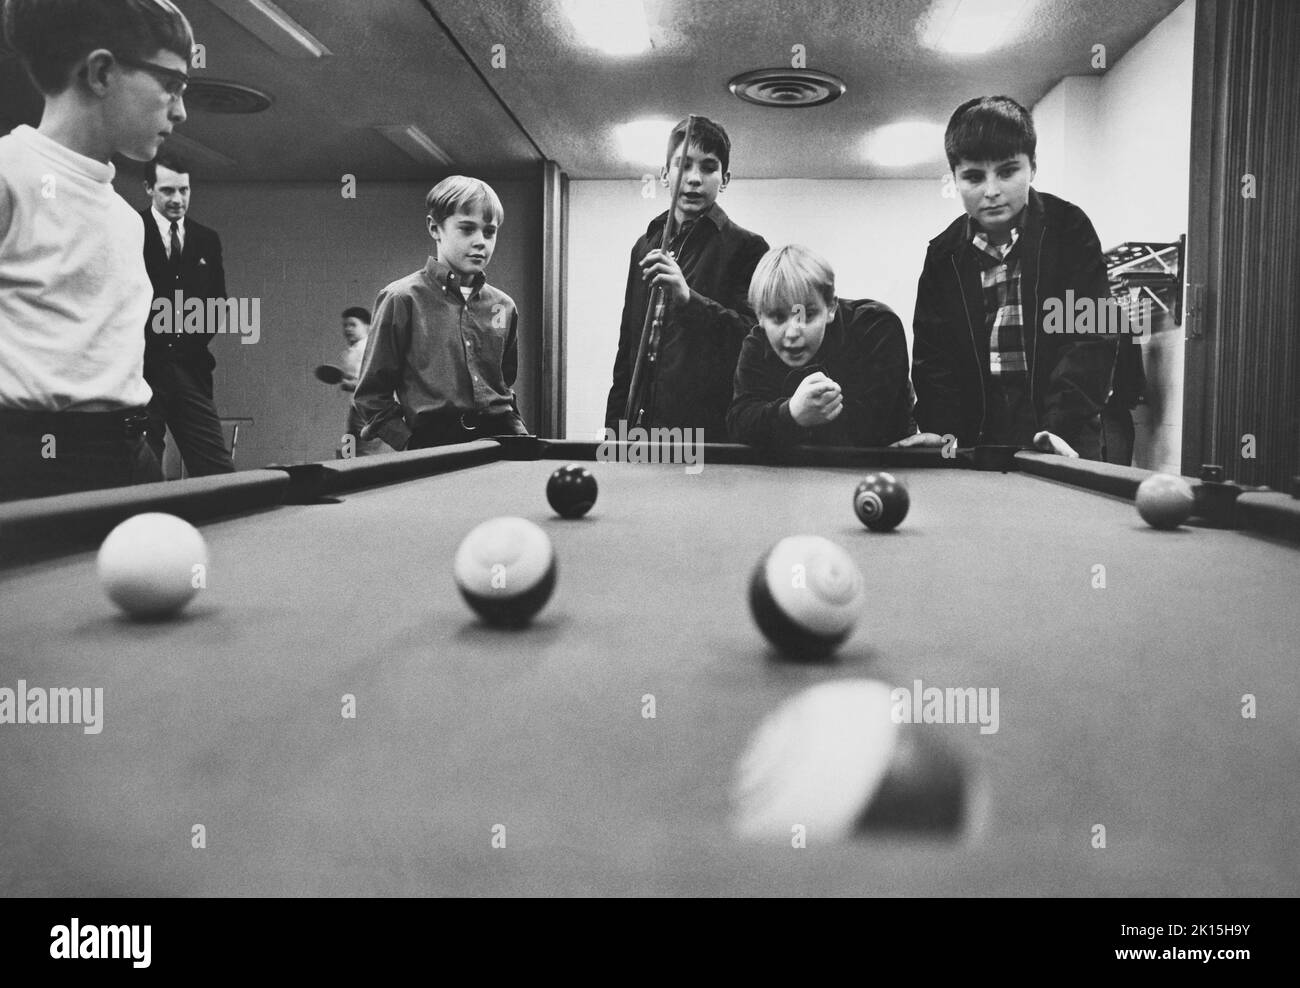 A group of boys play pool at a church recreation center in Atlanta, Georgia while an adult supervisor looks on. Pool, also more formally known as pocket billiards (mostly in North America) or pool billiards (mostly in Europe and Australia), is the family of cue sports and games played on a pool table having six receptacles called pockets along the rails, into which balls are deposited as the main goal of play. Popular versions include eight-ball and nine-ball. An obsolete term for pool is six-pocket. 1968, Stock Photo